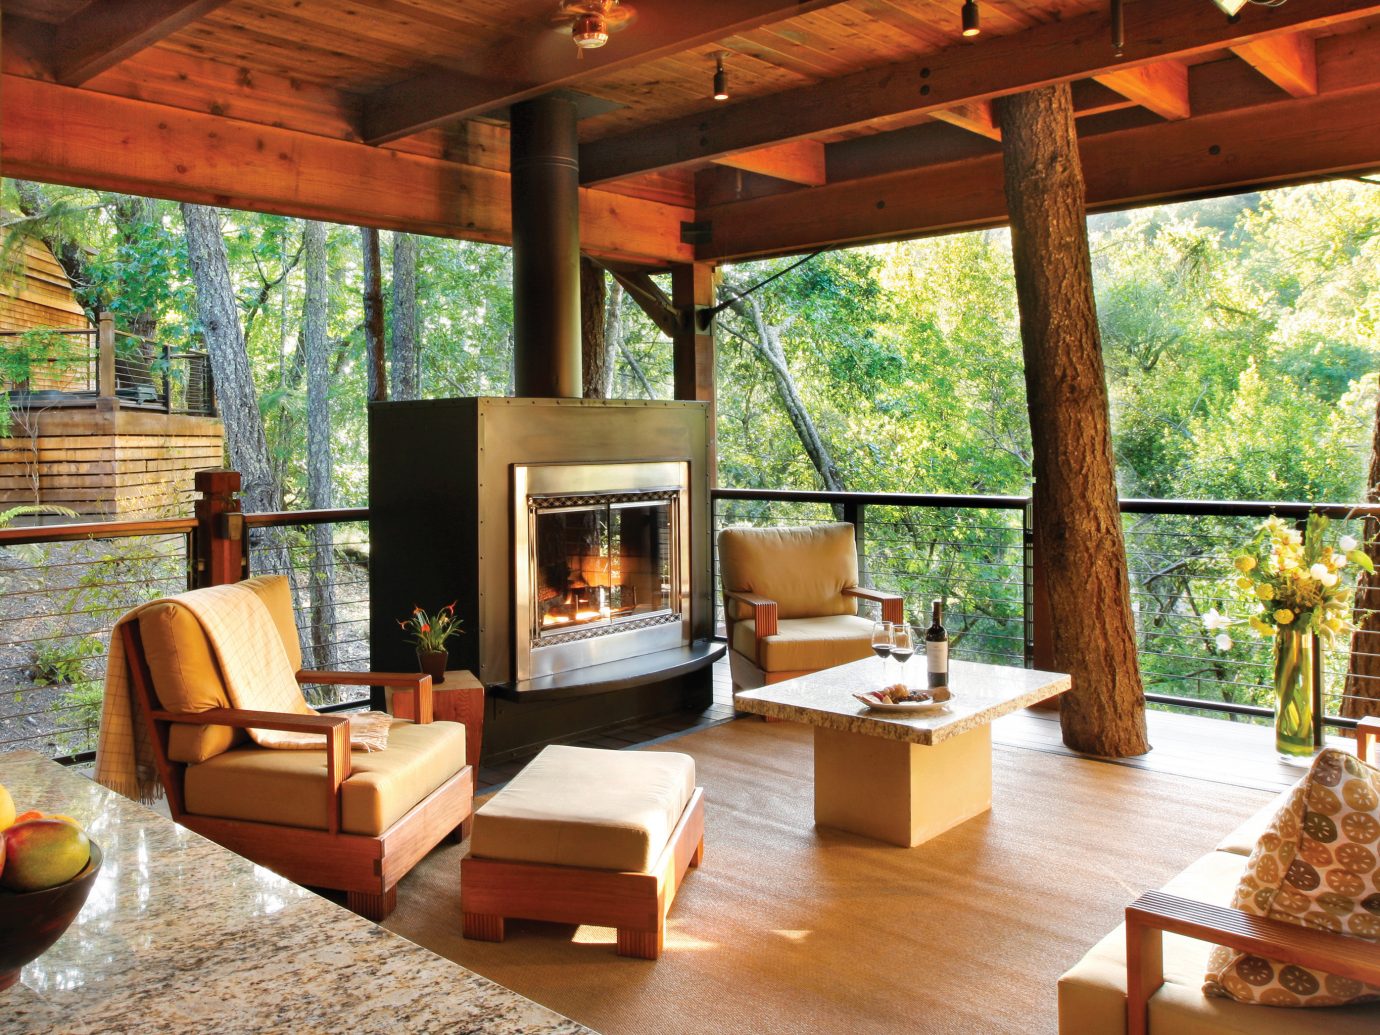 Eco Fireplace Food + Drink Hotels Luxury Outdoors Ranch Romance Romantic Rustic Scenic views Trip Ideas Wellness property Resort wooden living room home Villa cottage hacienda eco hotel outdoor structure farmhouse porch log cabin